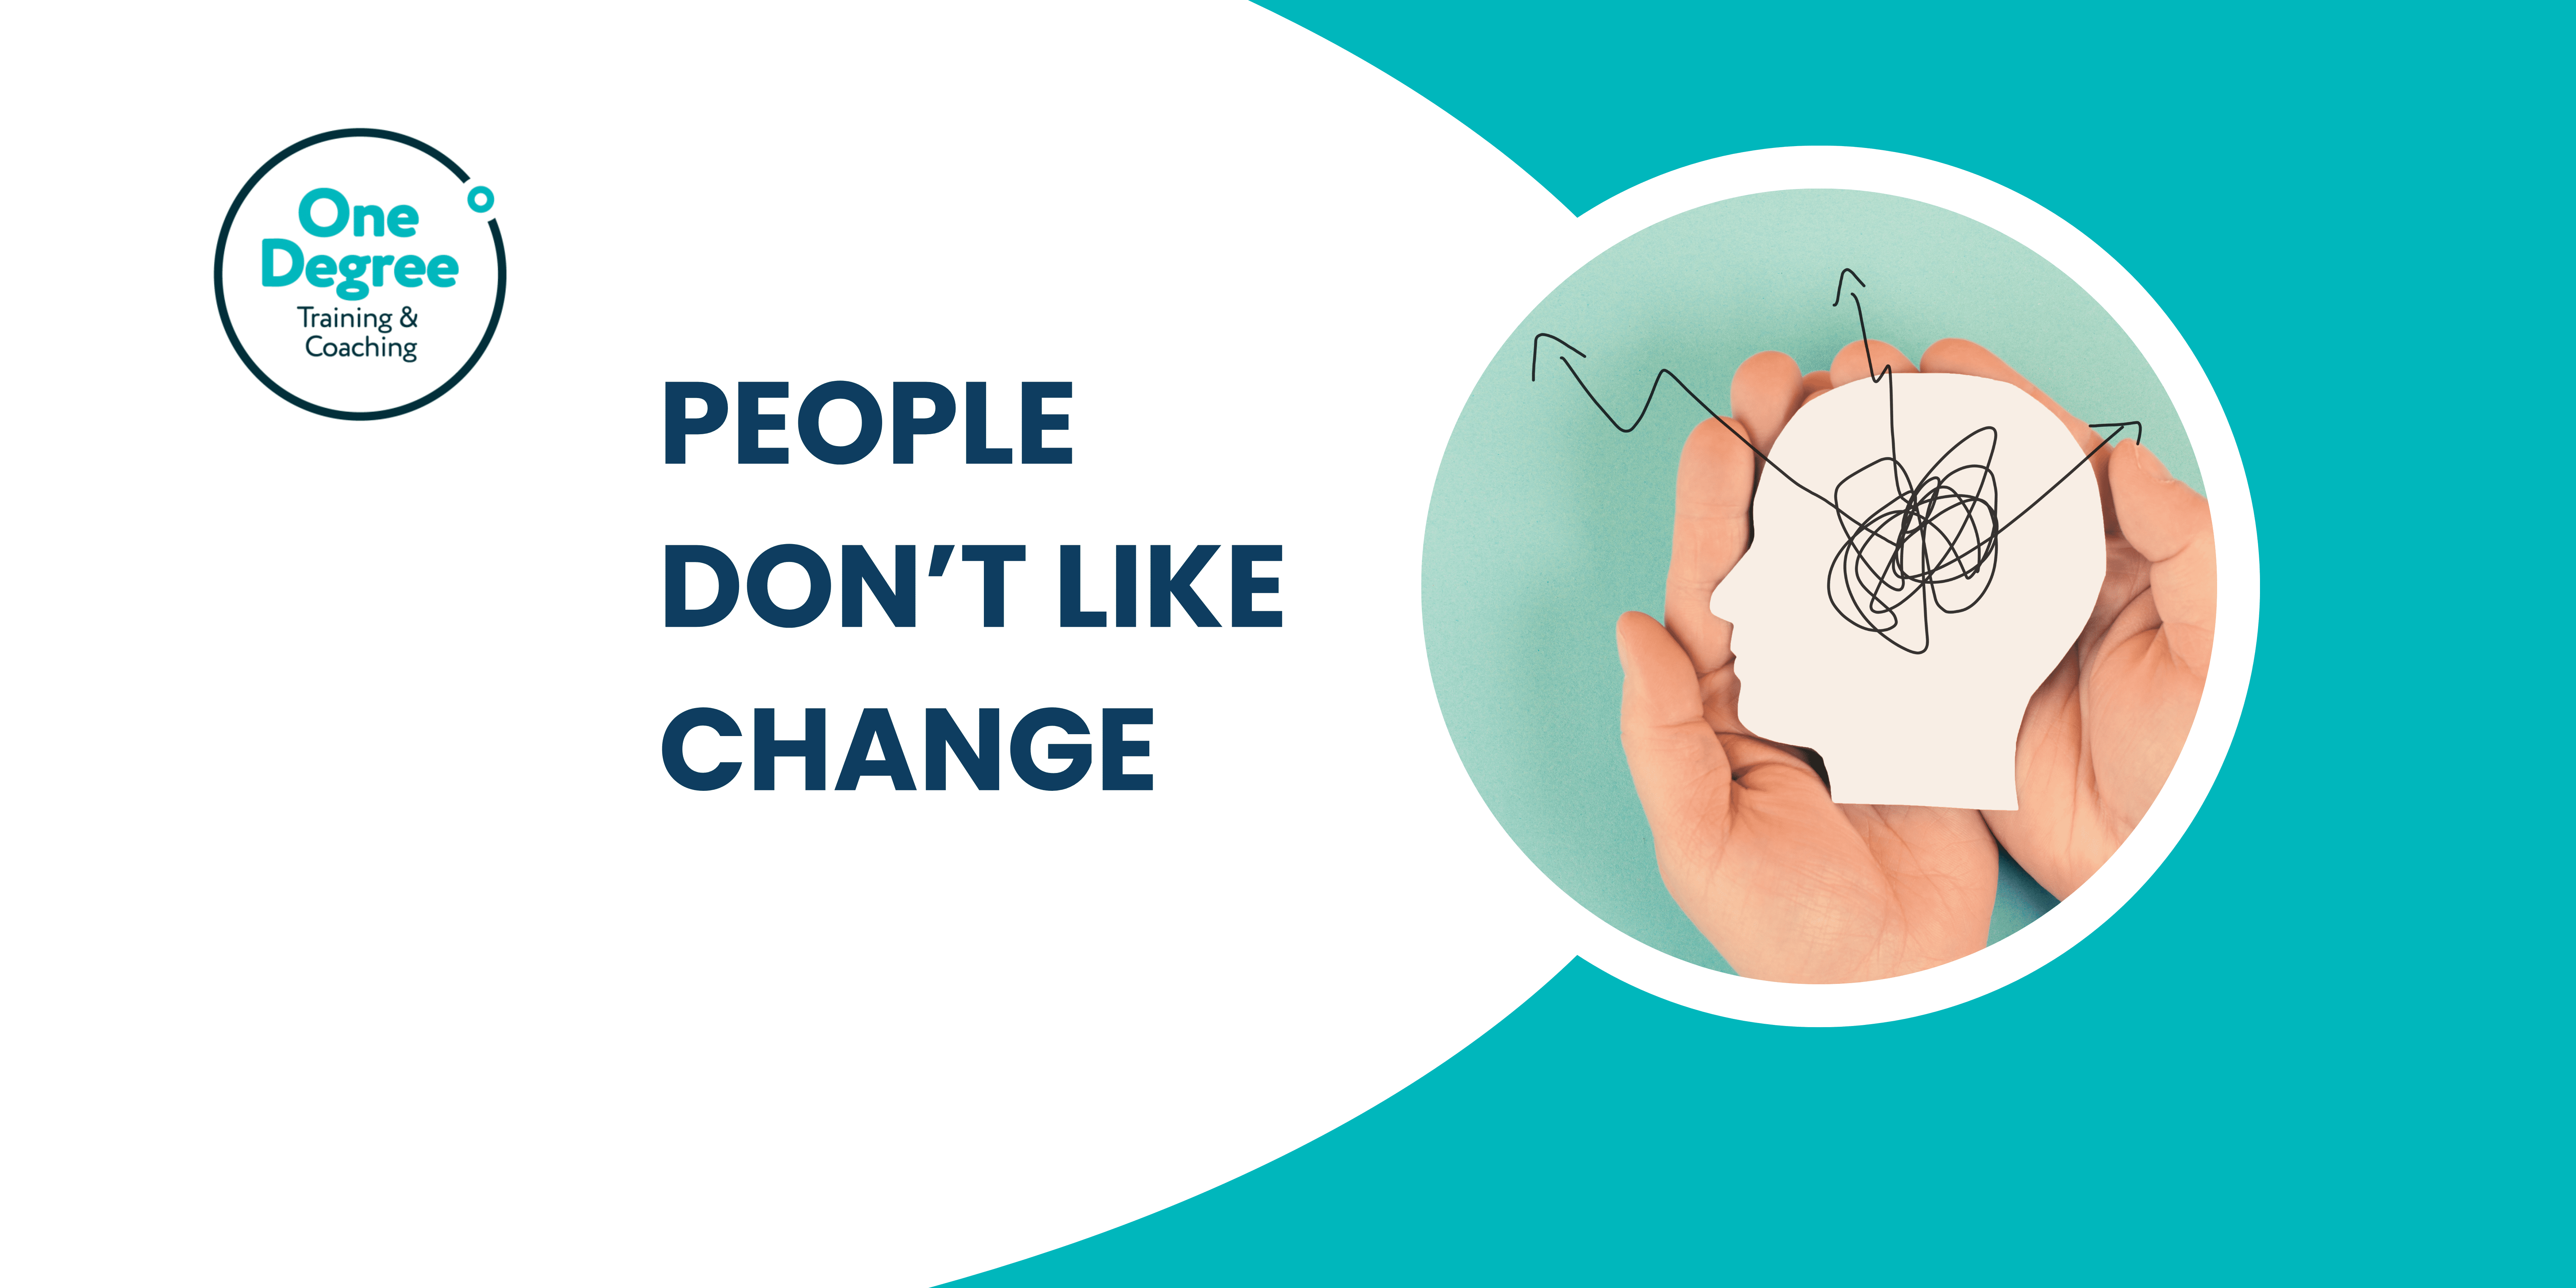 Why don’t people like change?